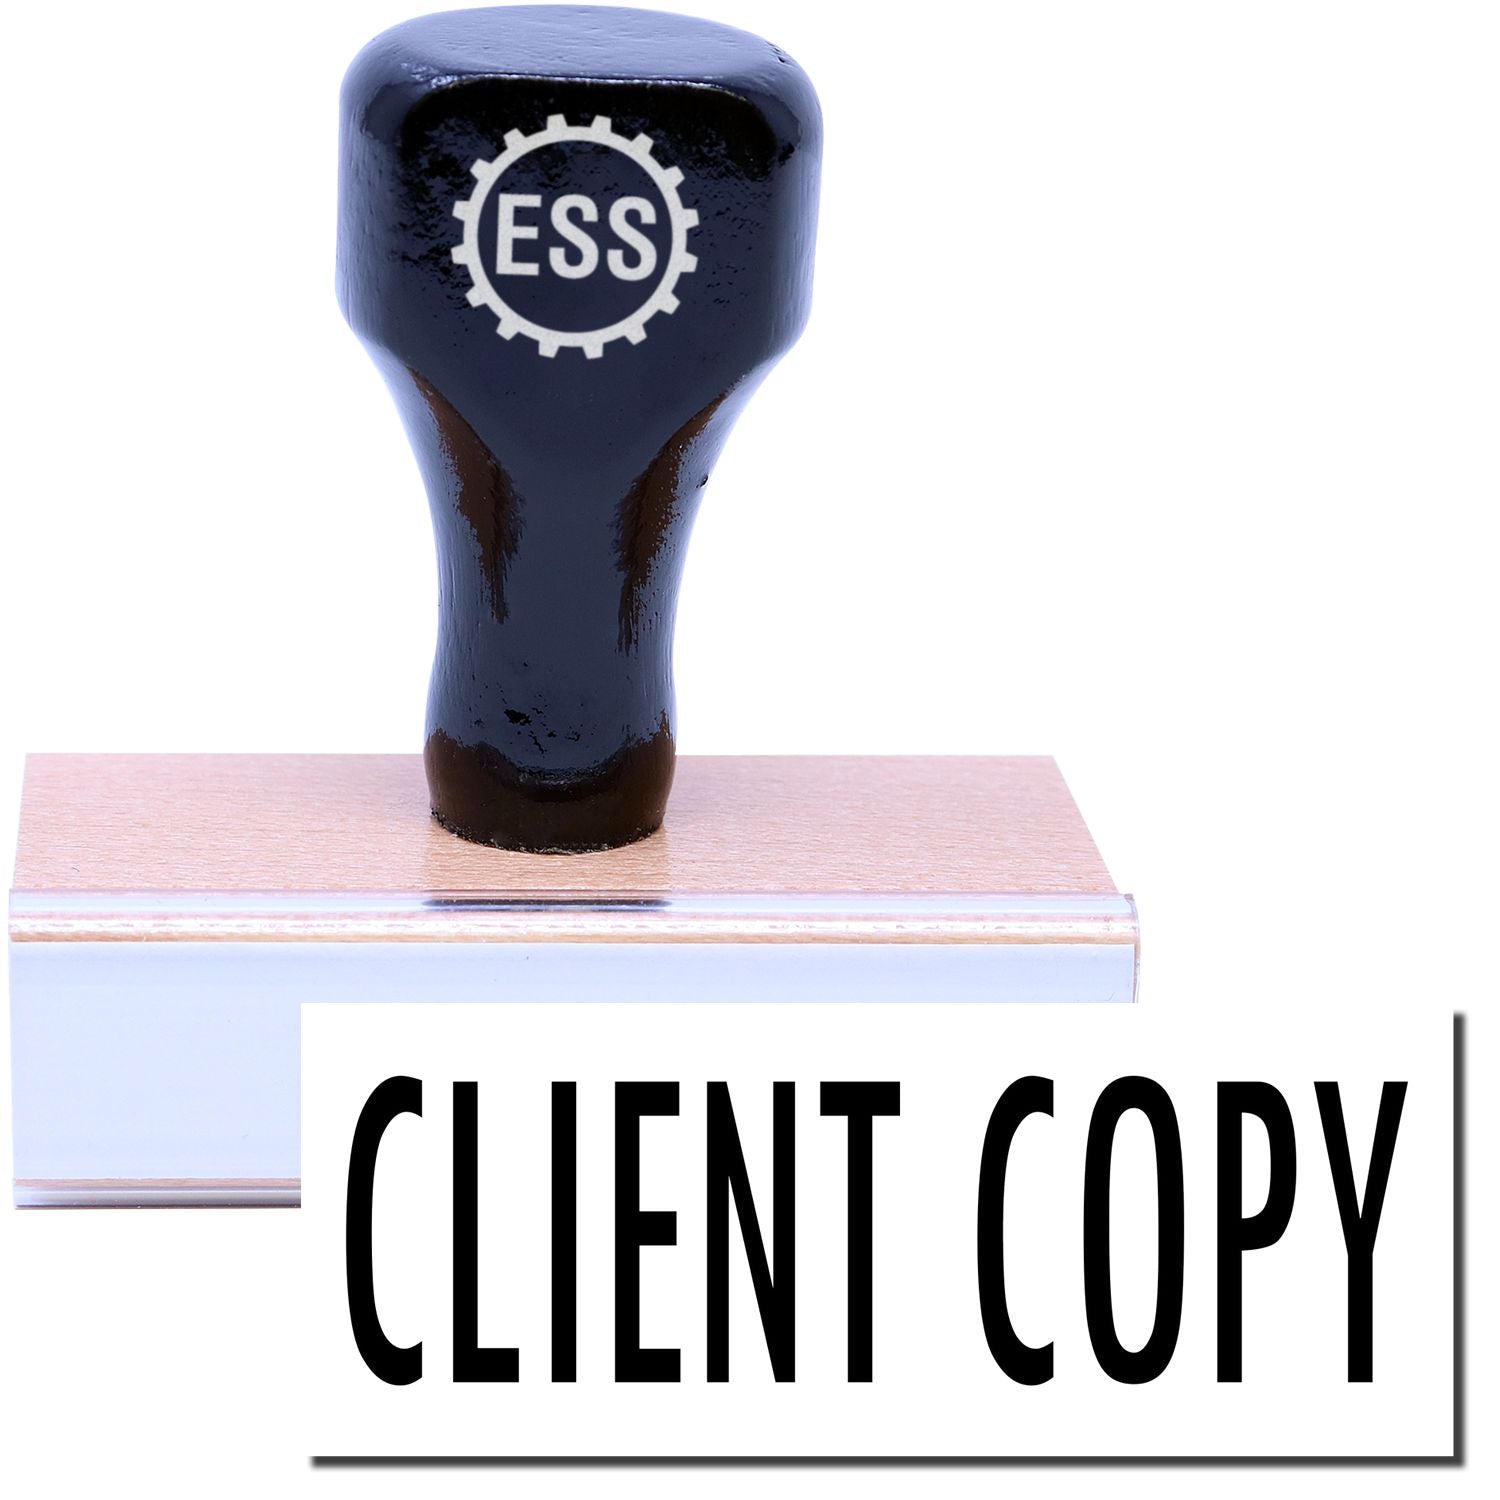 A stock office rubber stamp with a stamped image showing how the text "CLIENT COPY" is displayed after stamping.